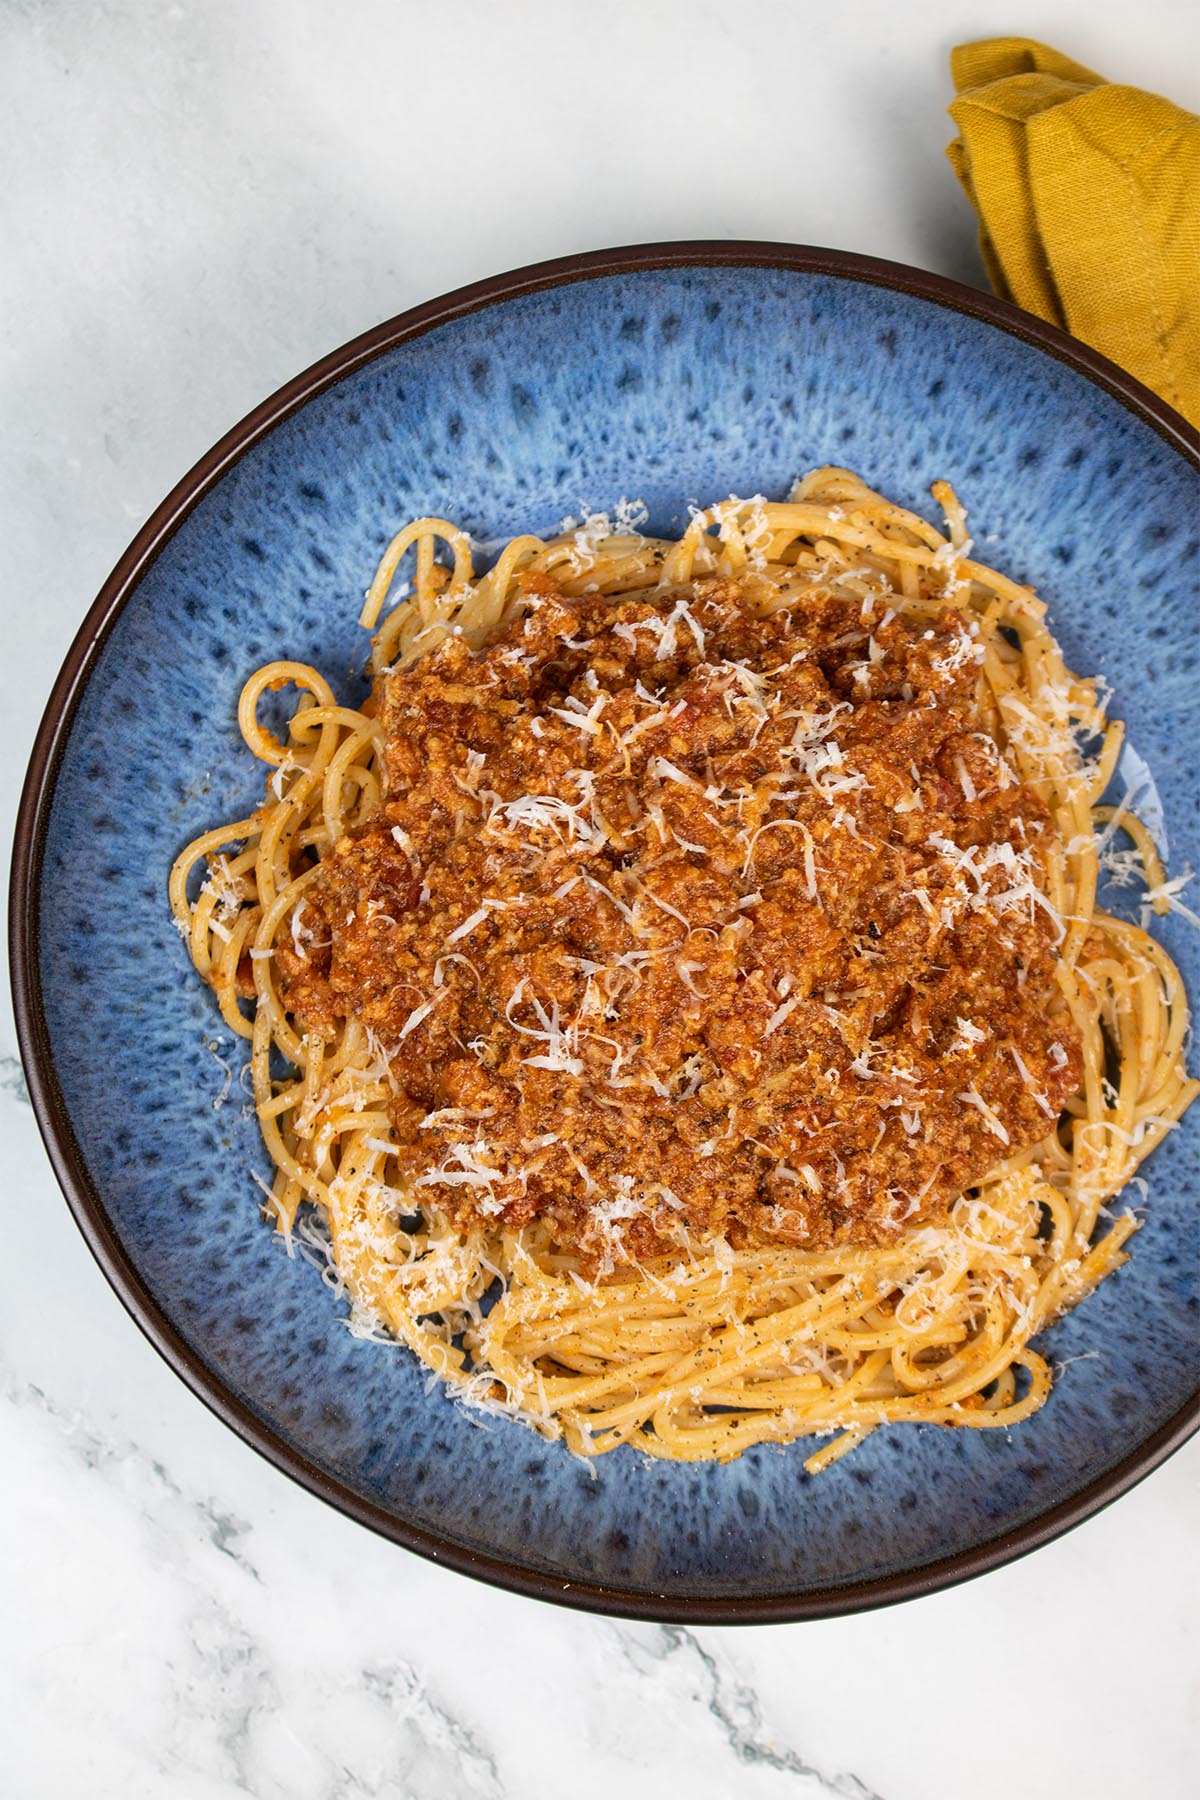 Bolognese sauce served on spaghetti in a blue patterned pasta bowl with mustard napkin in the background